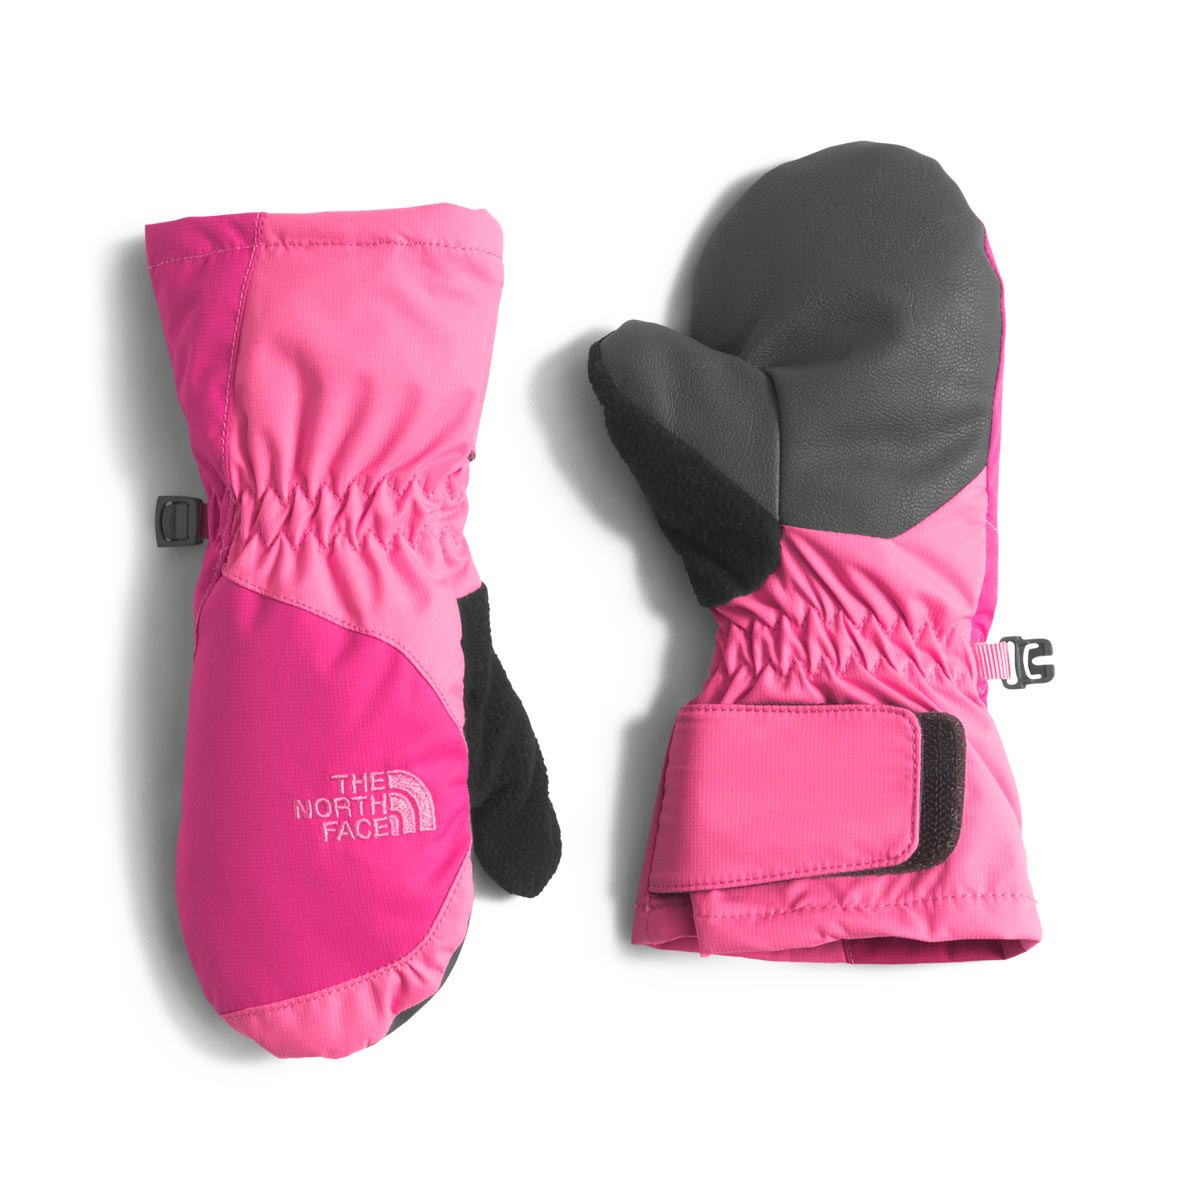 The North Face Toddlers' Mitt